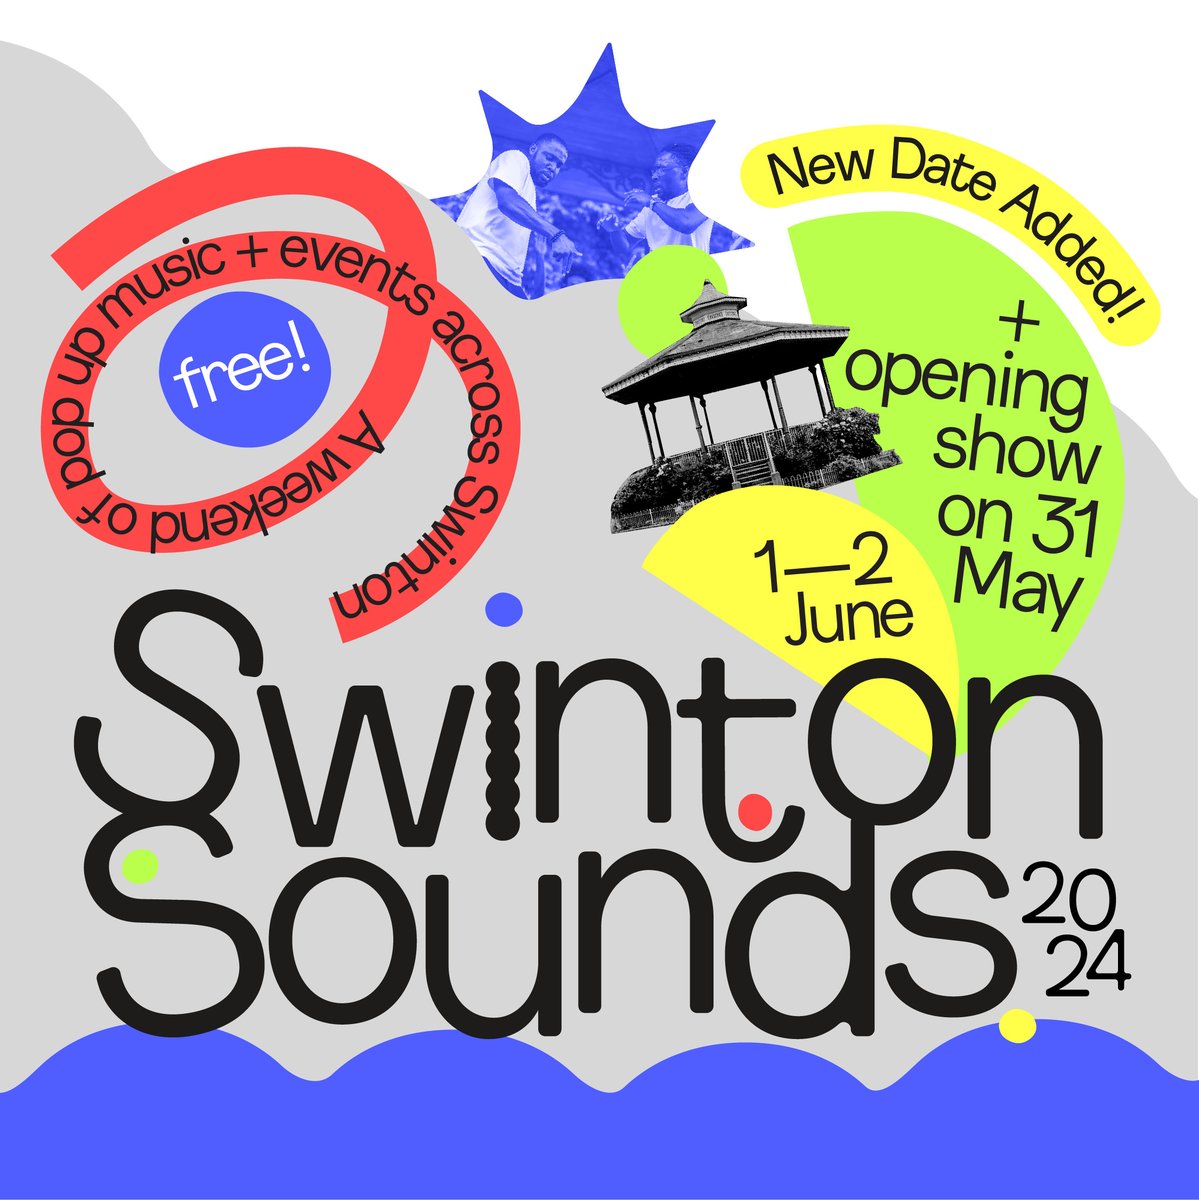 The line-up for Swinton Sounds 2024 is here and bigger than ever! A full weekend of FREE pop-up music, performance and fun, taking audiences on a journey spanning the park, the pub, the precinct, and the Palais. #SwintonSounds